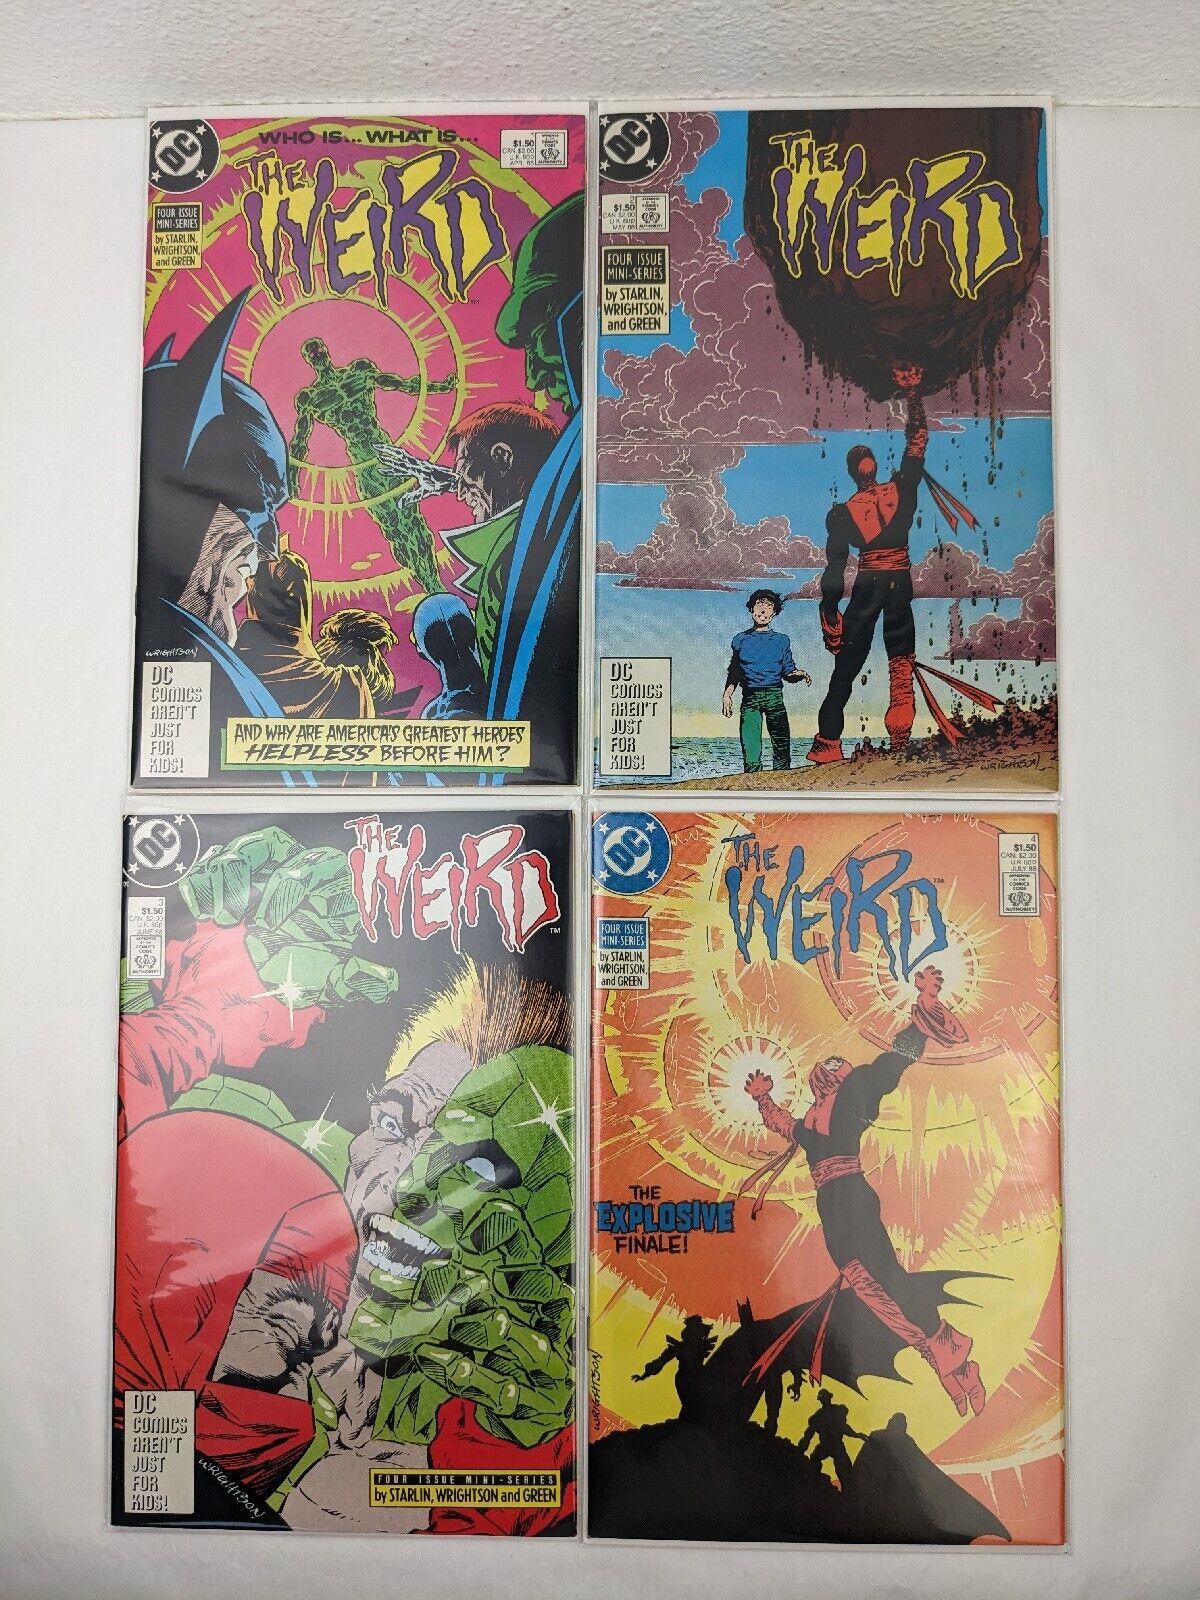 The Weird #1 - 4 DC Comics 1987 - 1988 Complete Near Mint Bagged Boarded 1 2 3 4